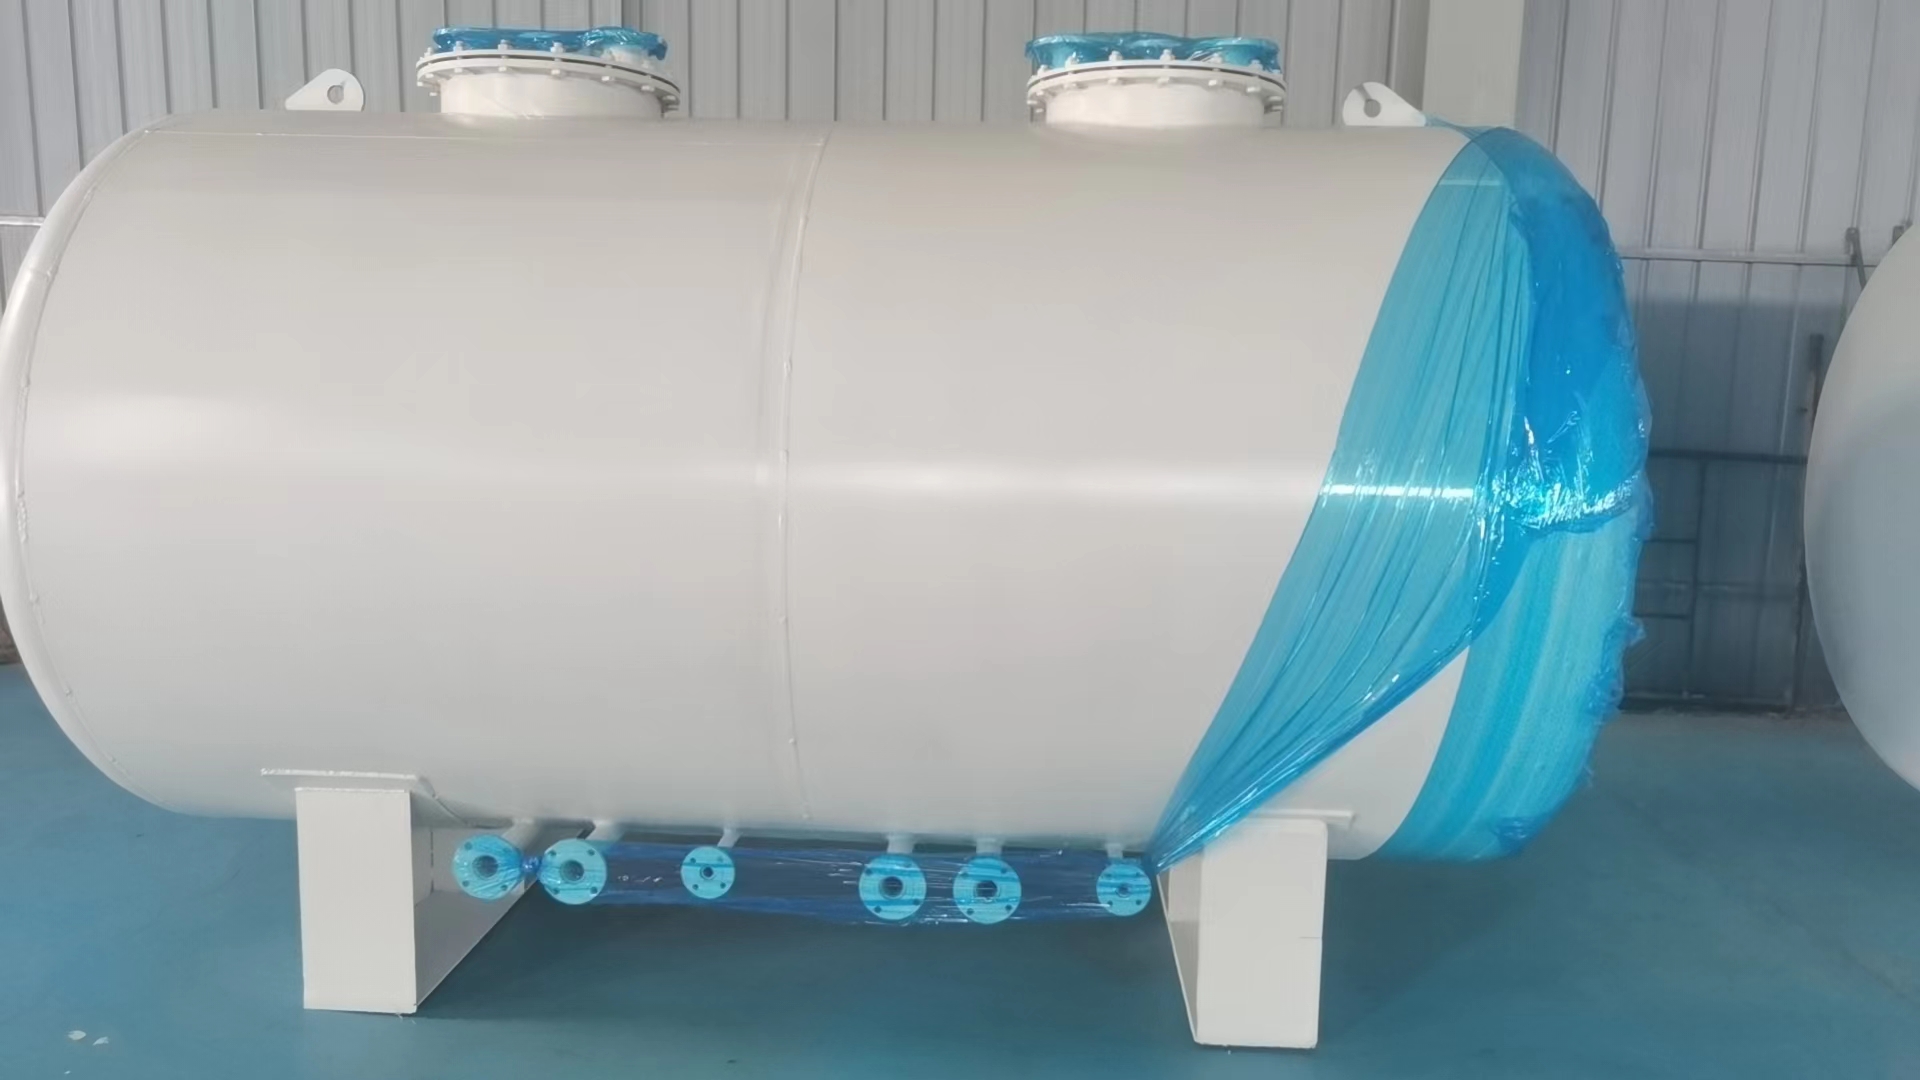 Oil tanks can be made from a variety of materials